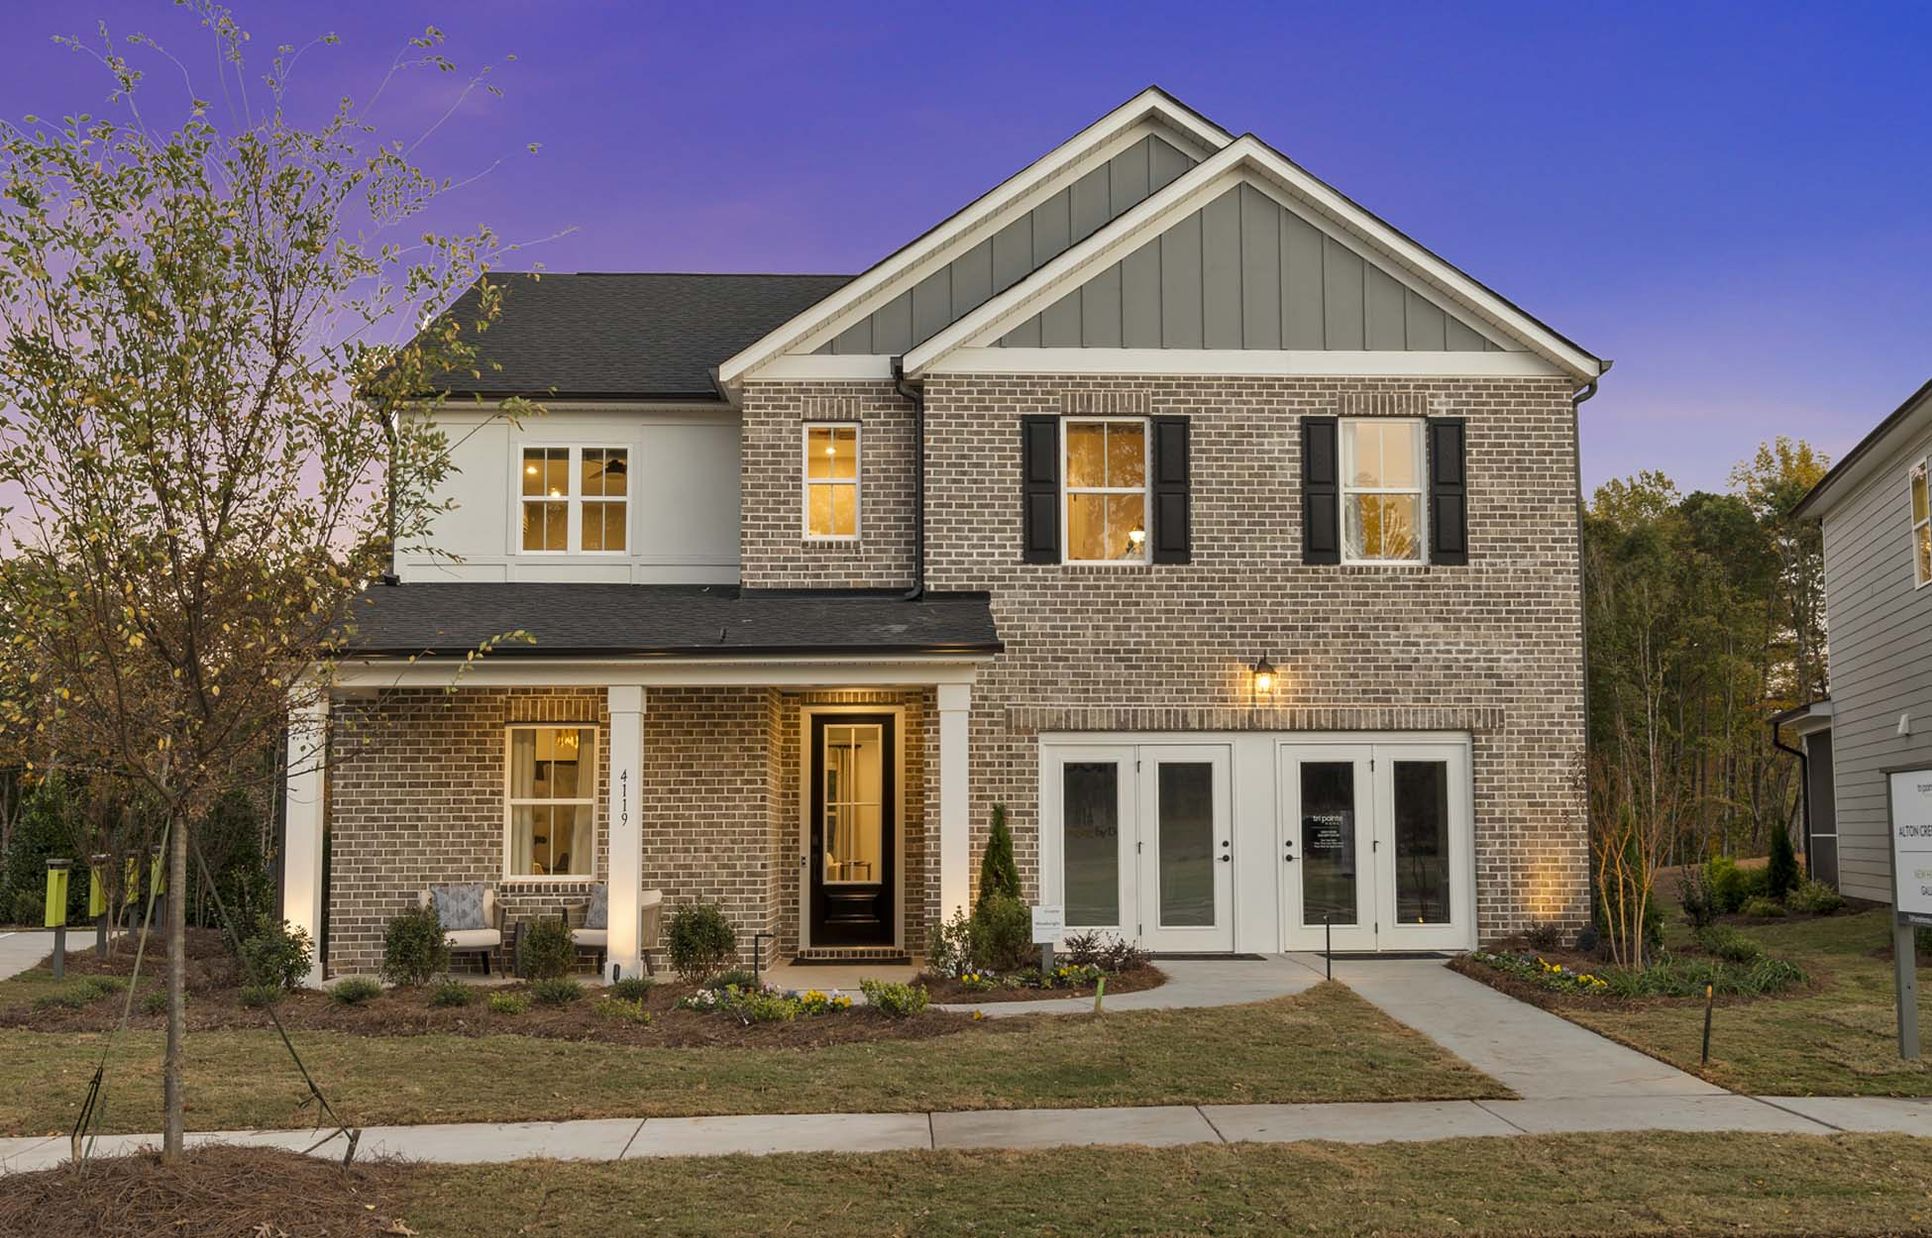 Alton Creek | The Woodwright:Model Home